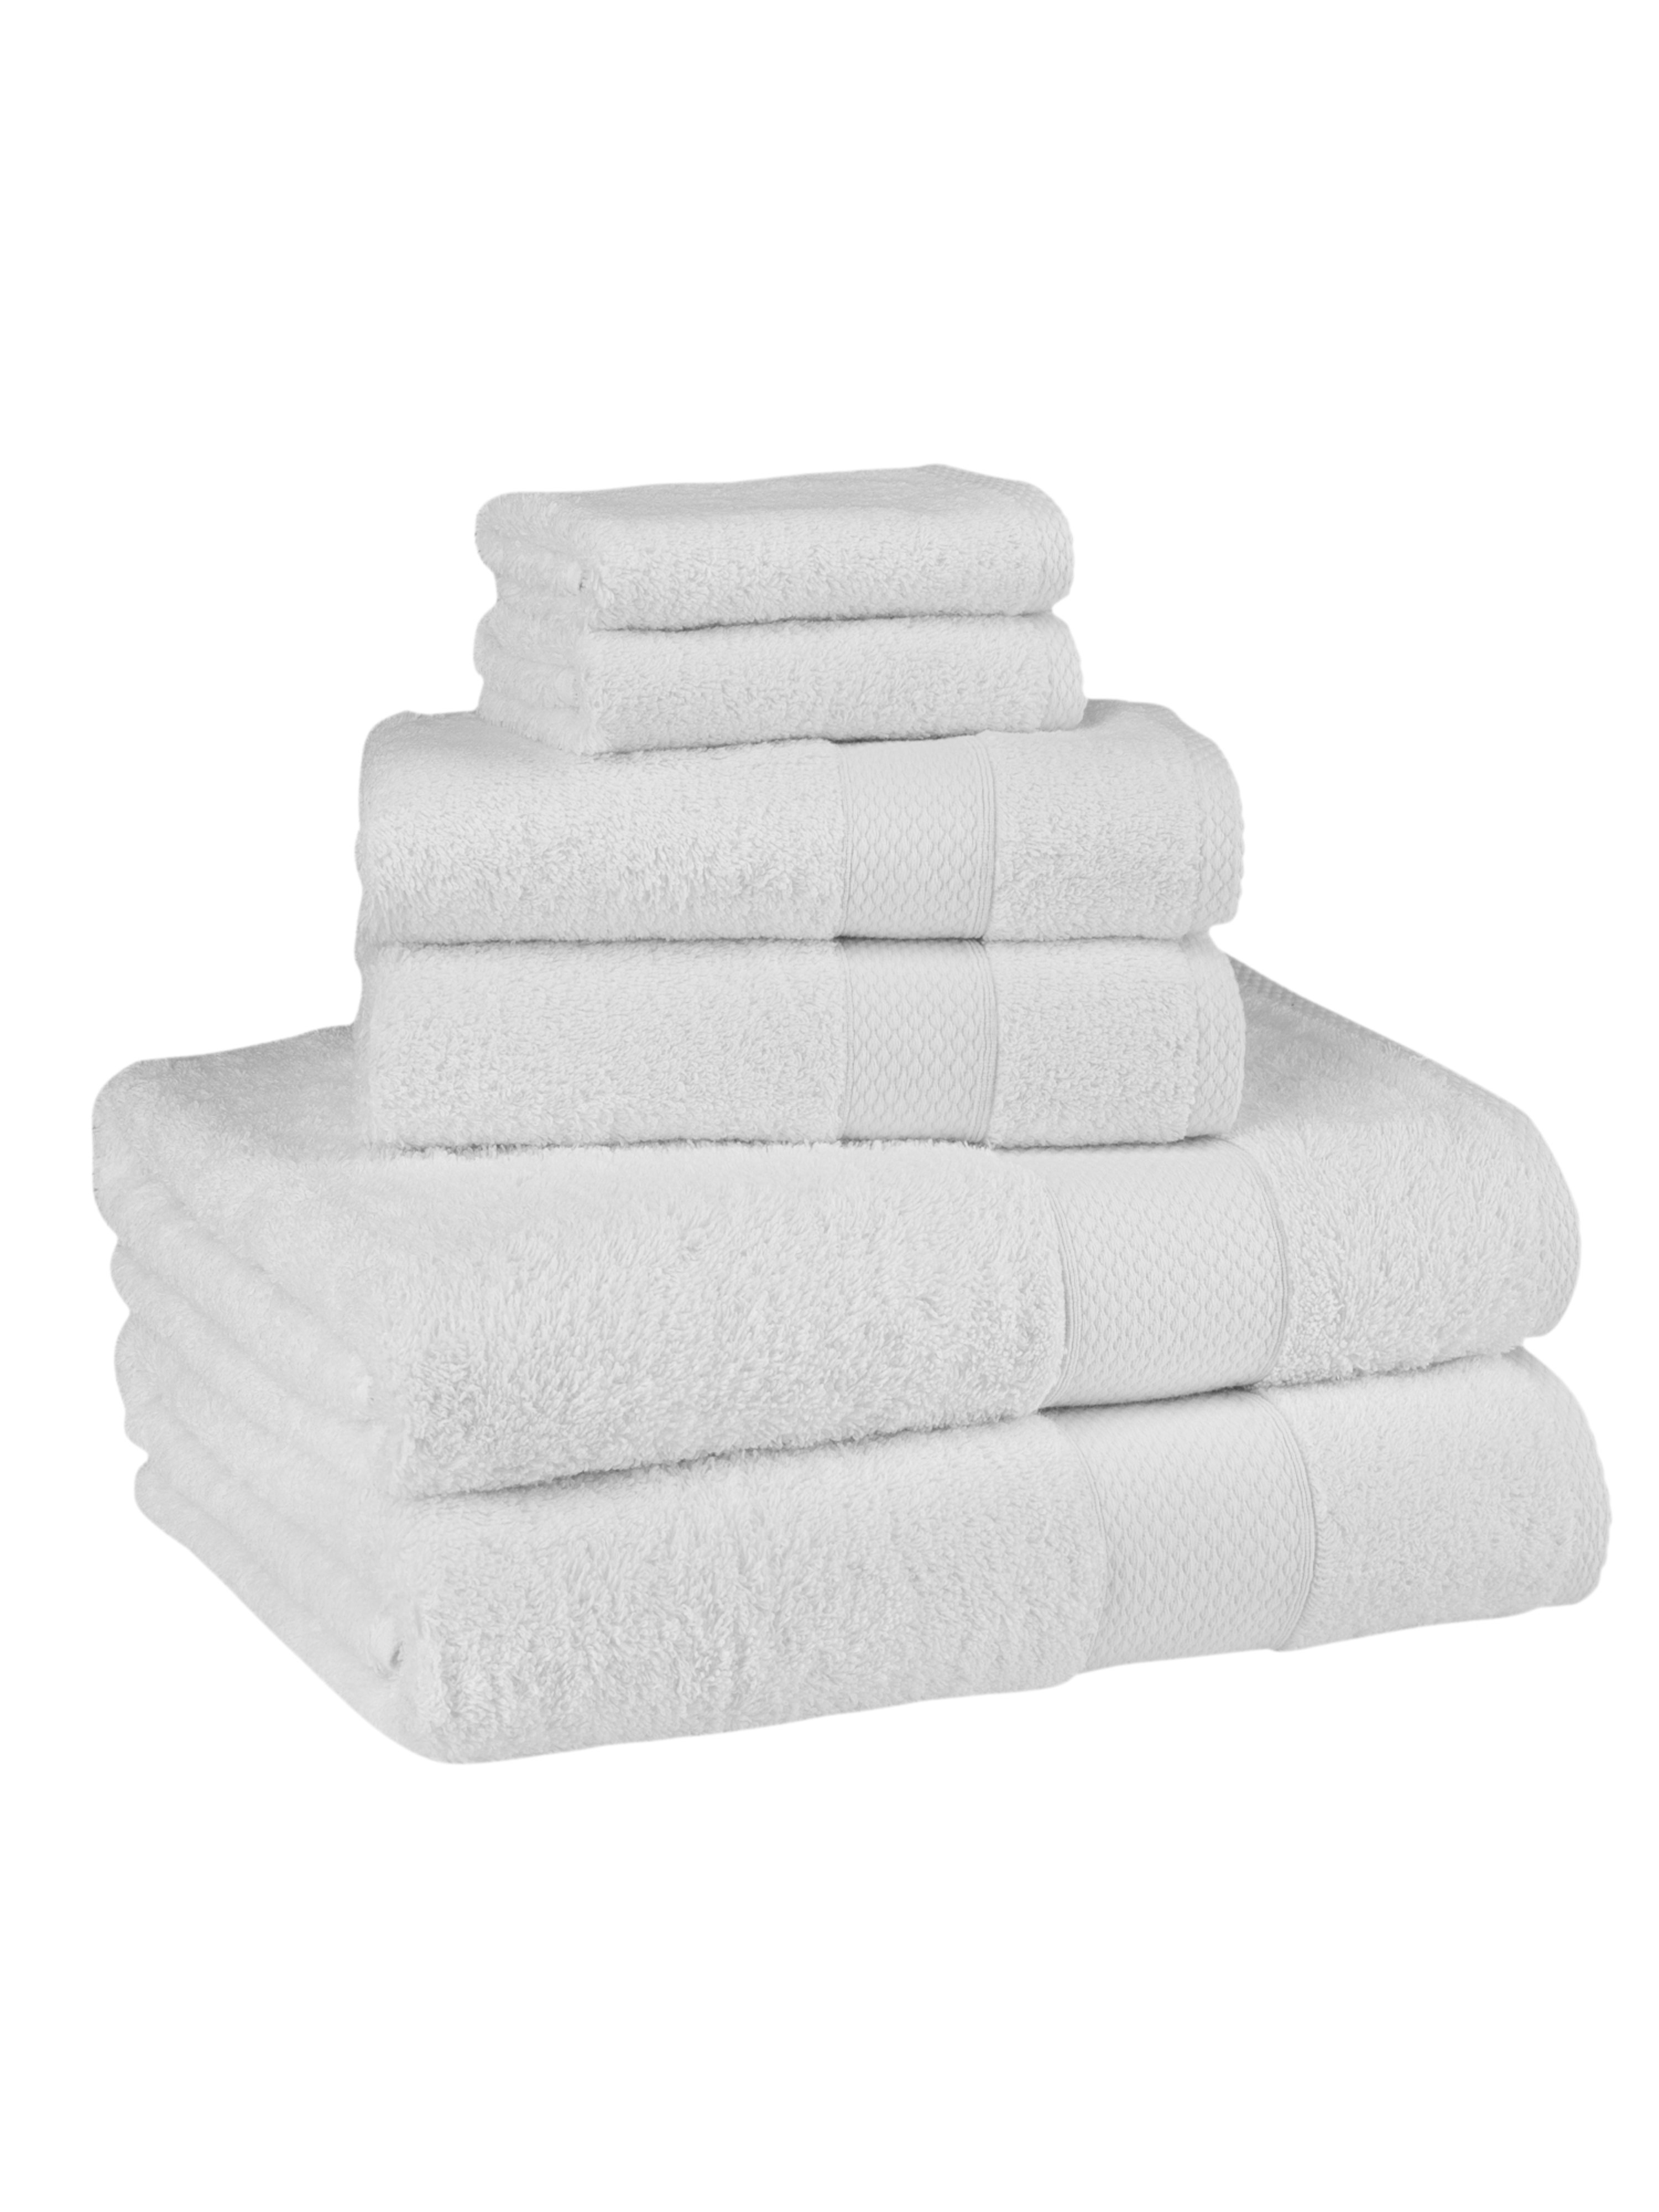 Classic Turkish Towels Madison Towel Collection In White